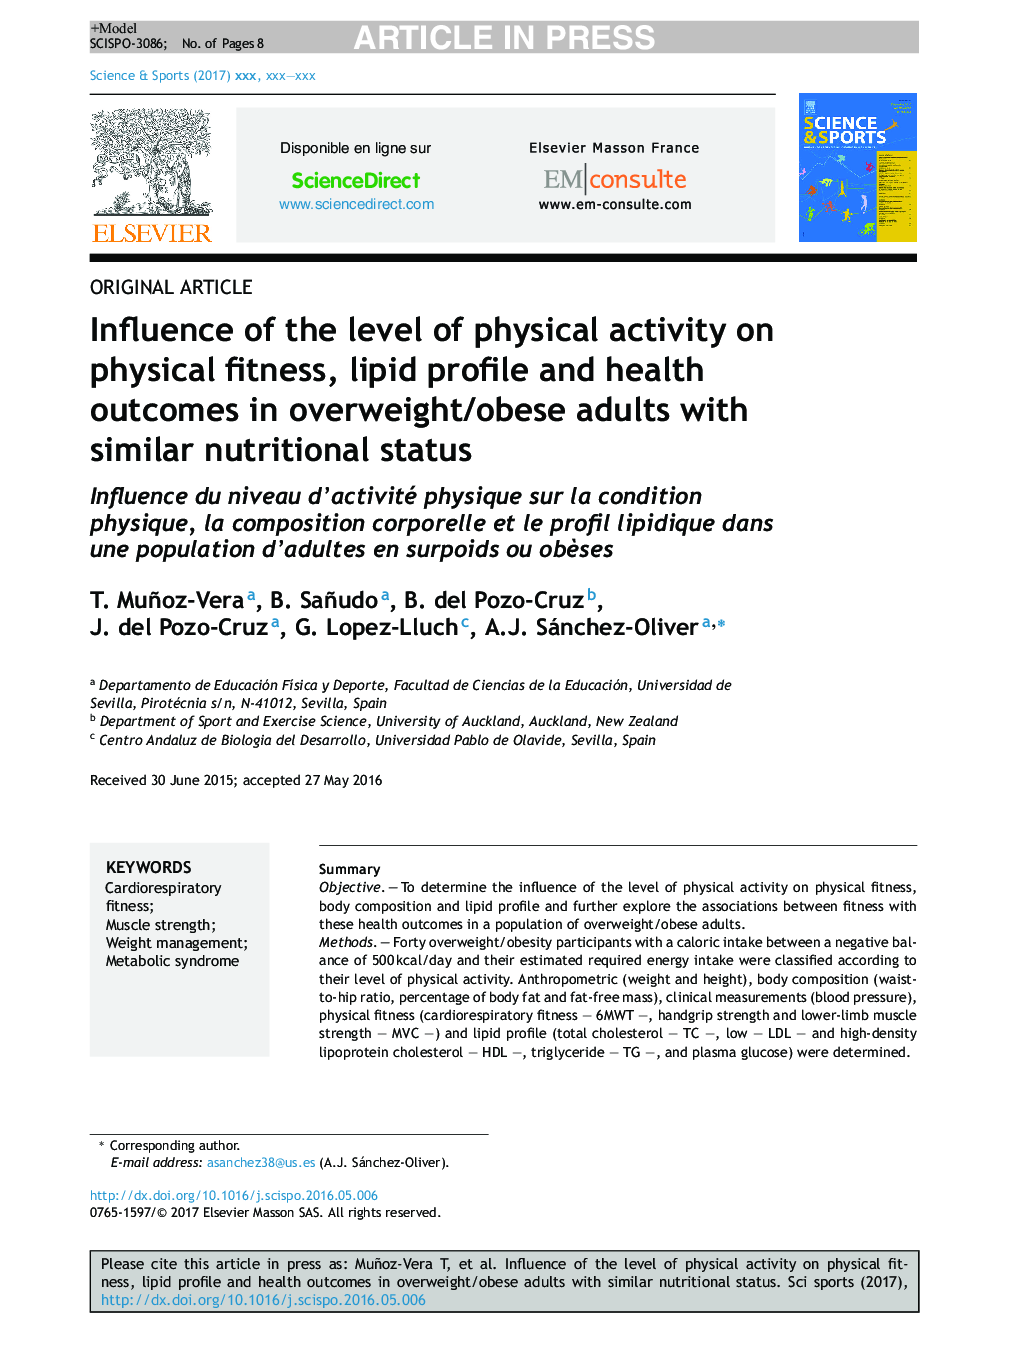 Influence of the level of physical activity on physical fitness, lipid profile and health outcomes in overweight/obese adults with similar nutritional status